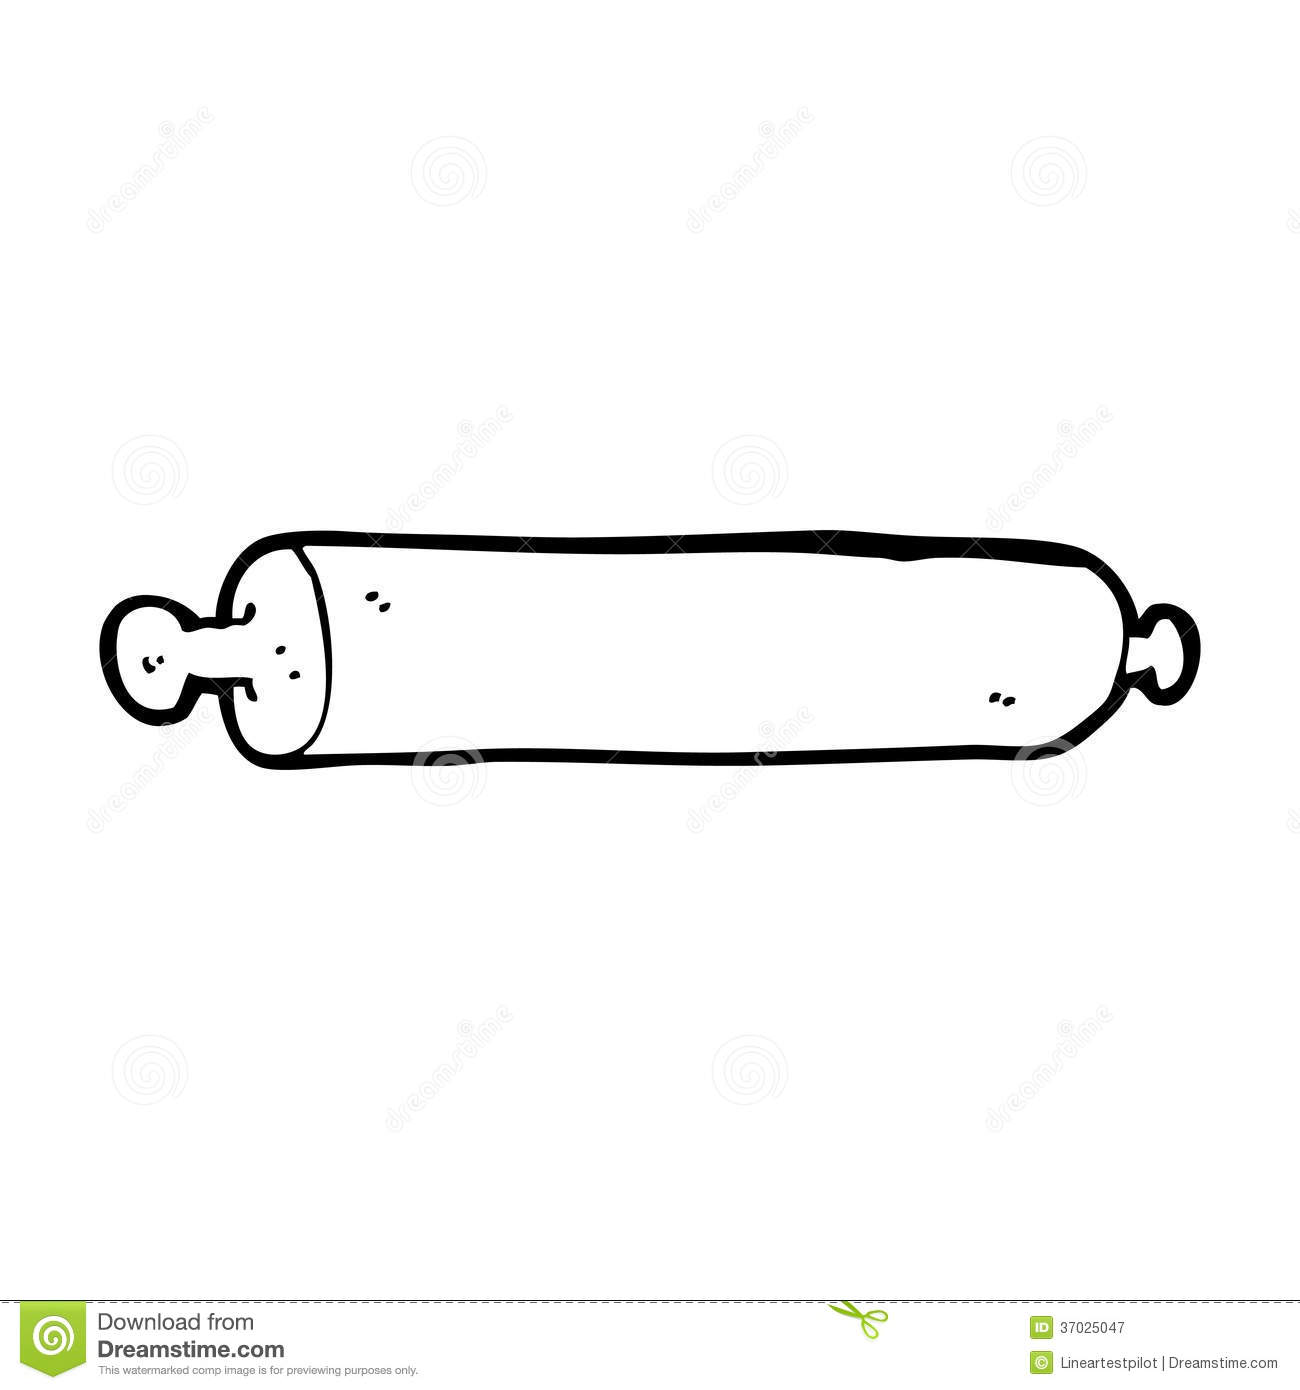 Cartoon Rolling Pin Royalty Free Stock Photography   Image  37025047